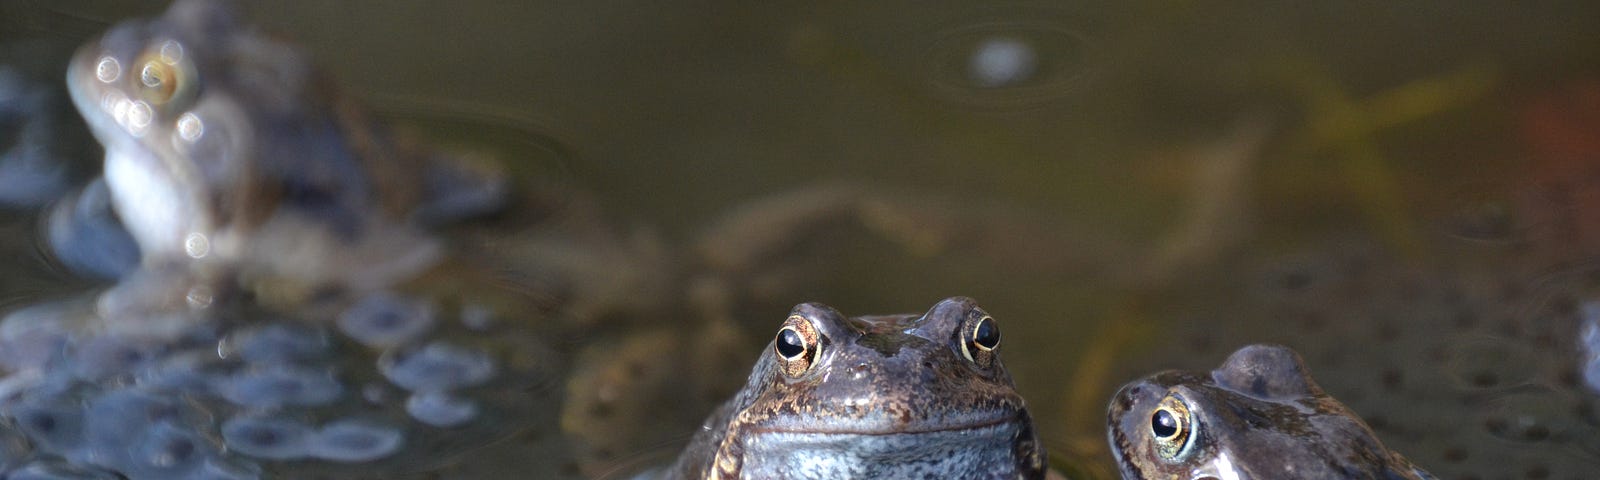 Two frogs in a pond.